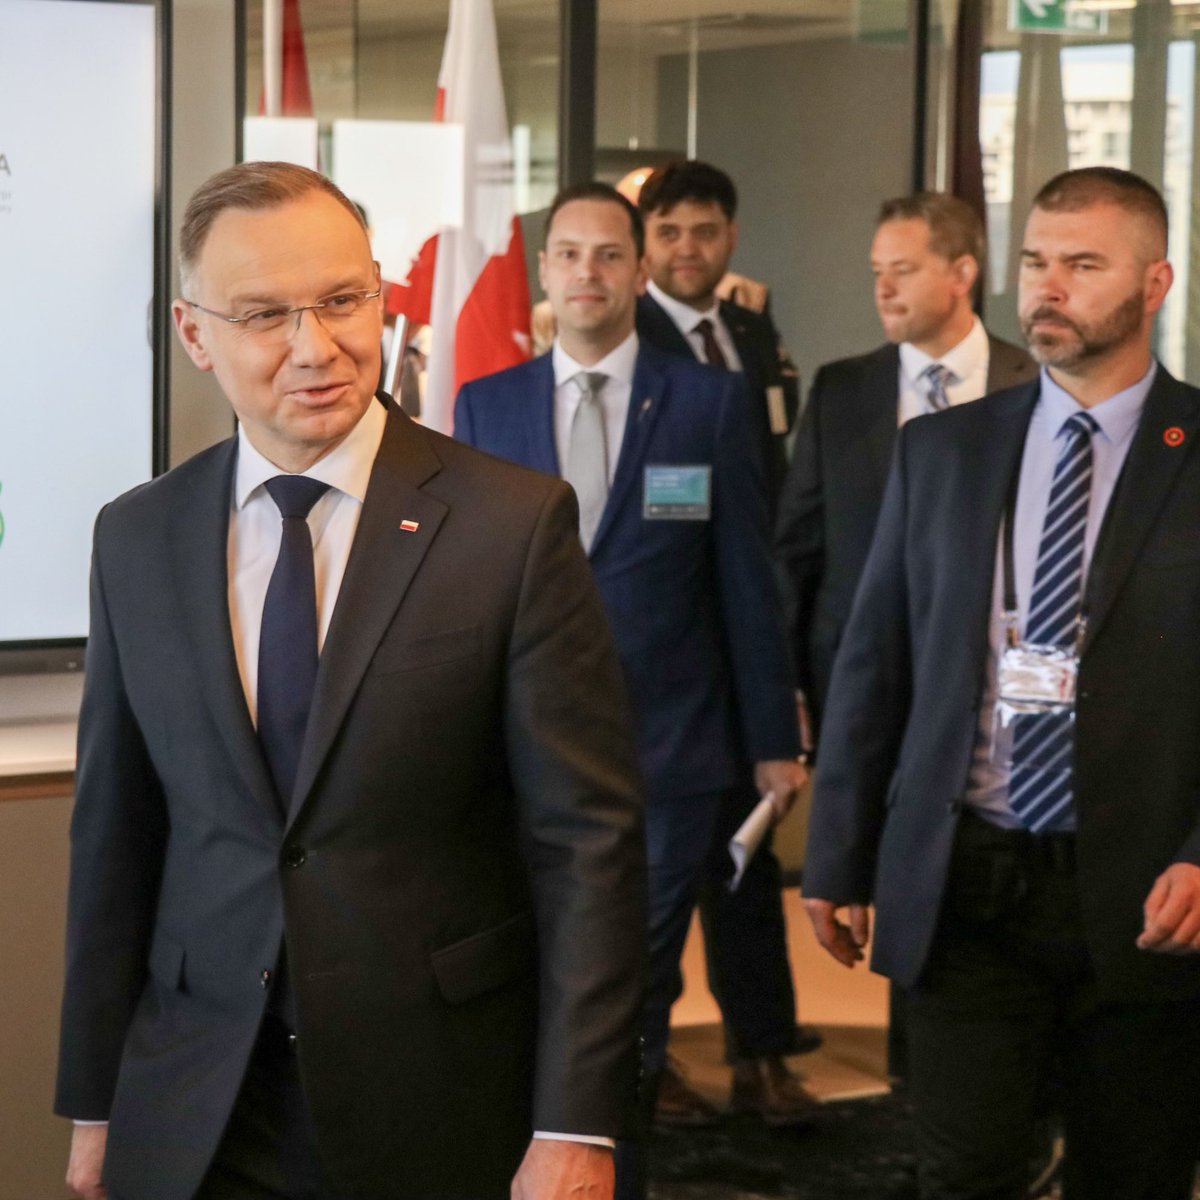 This morning I had the honour of introducing His Excellency, @AndrzejDuda, President of #Poland, at the Hydrogen Business Forum at @EdmontonGlobal Global. Alberta has a great trading partner in Poland and we look forward to collaborating on the incredible potential of hydrogen.